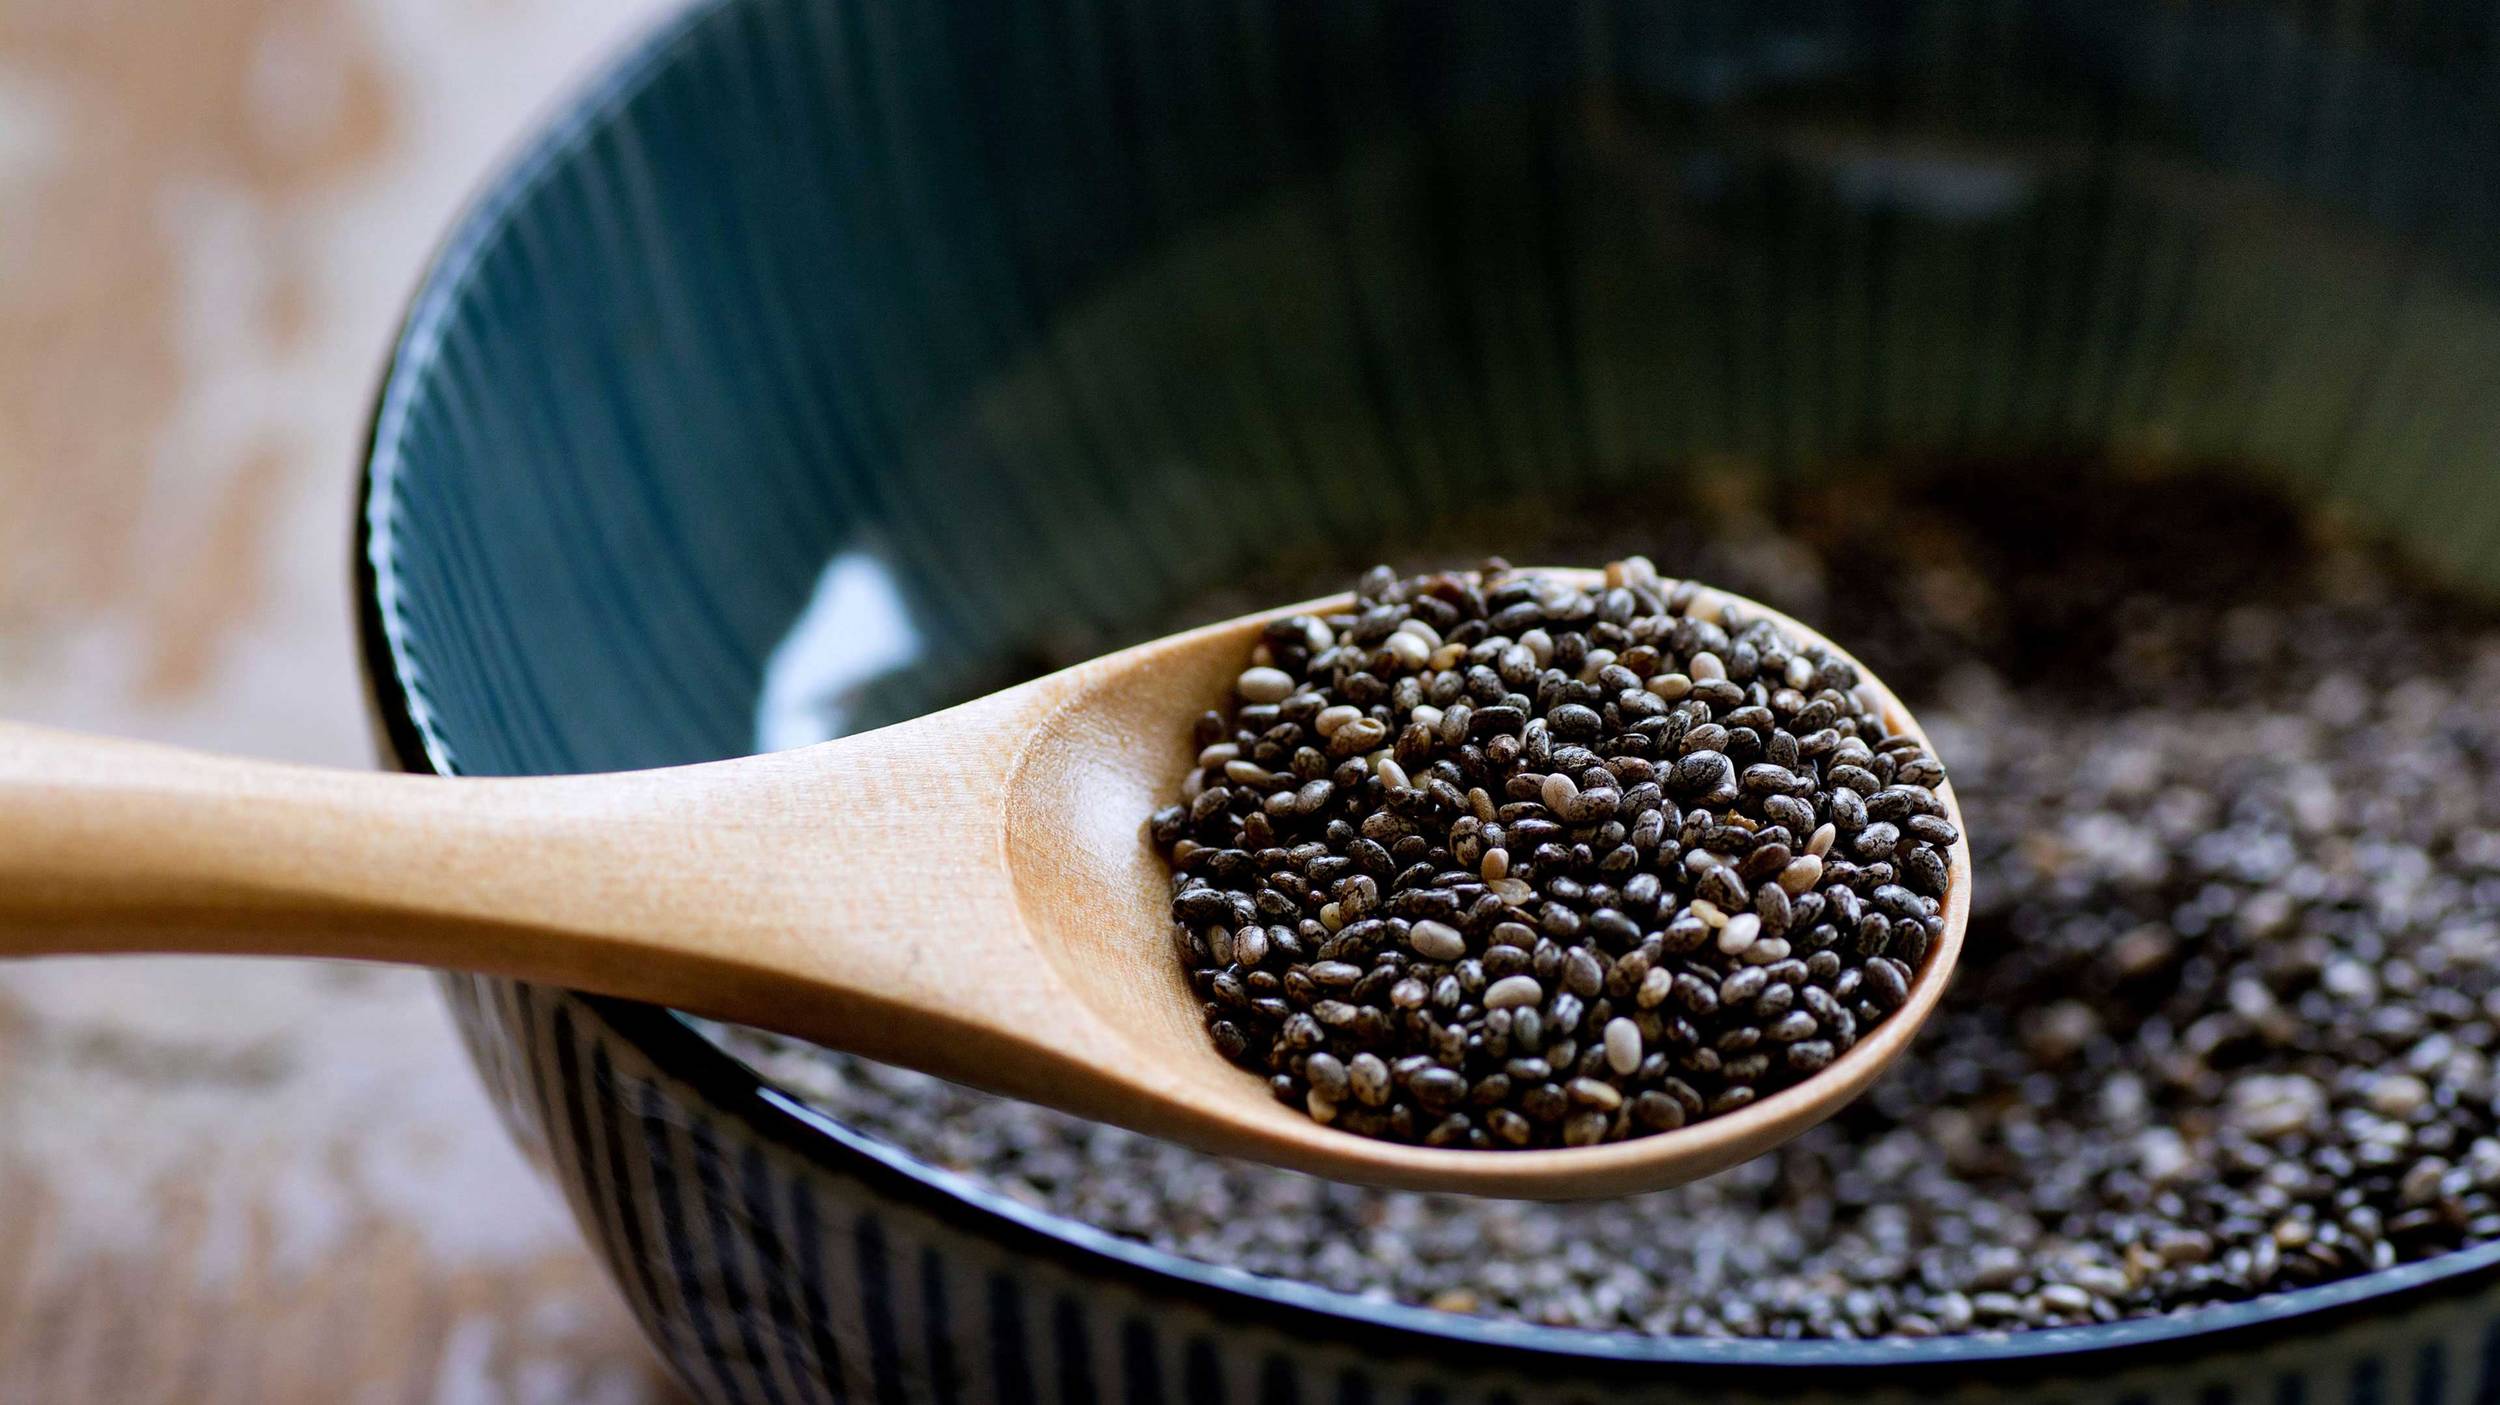 In recent years chia seeds have been widely recognised as a superfood due to their impressive nutritional properties and medical values.